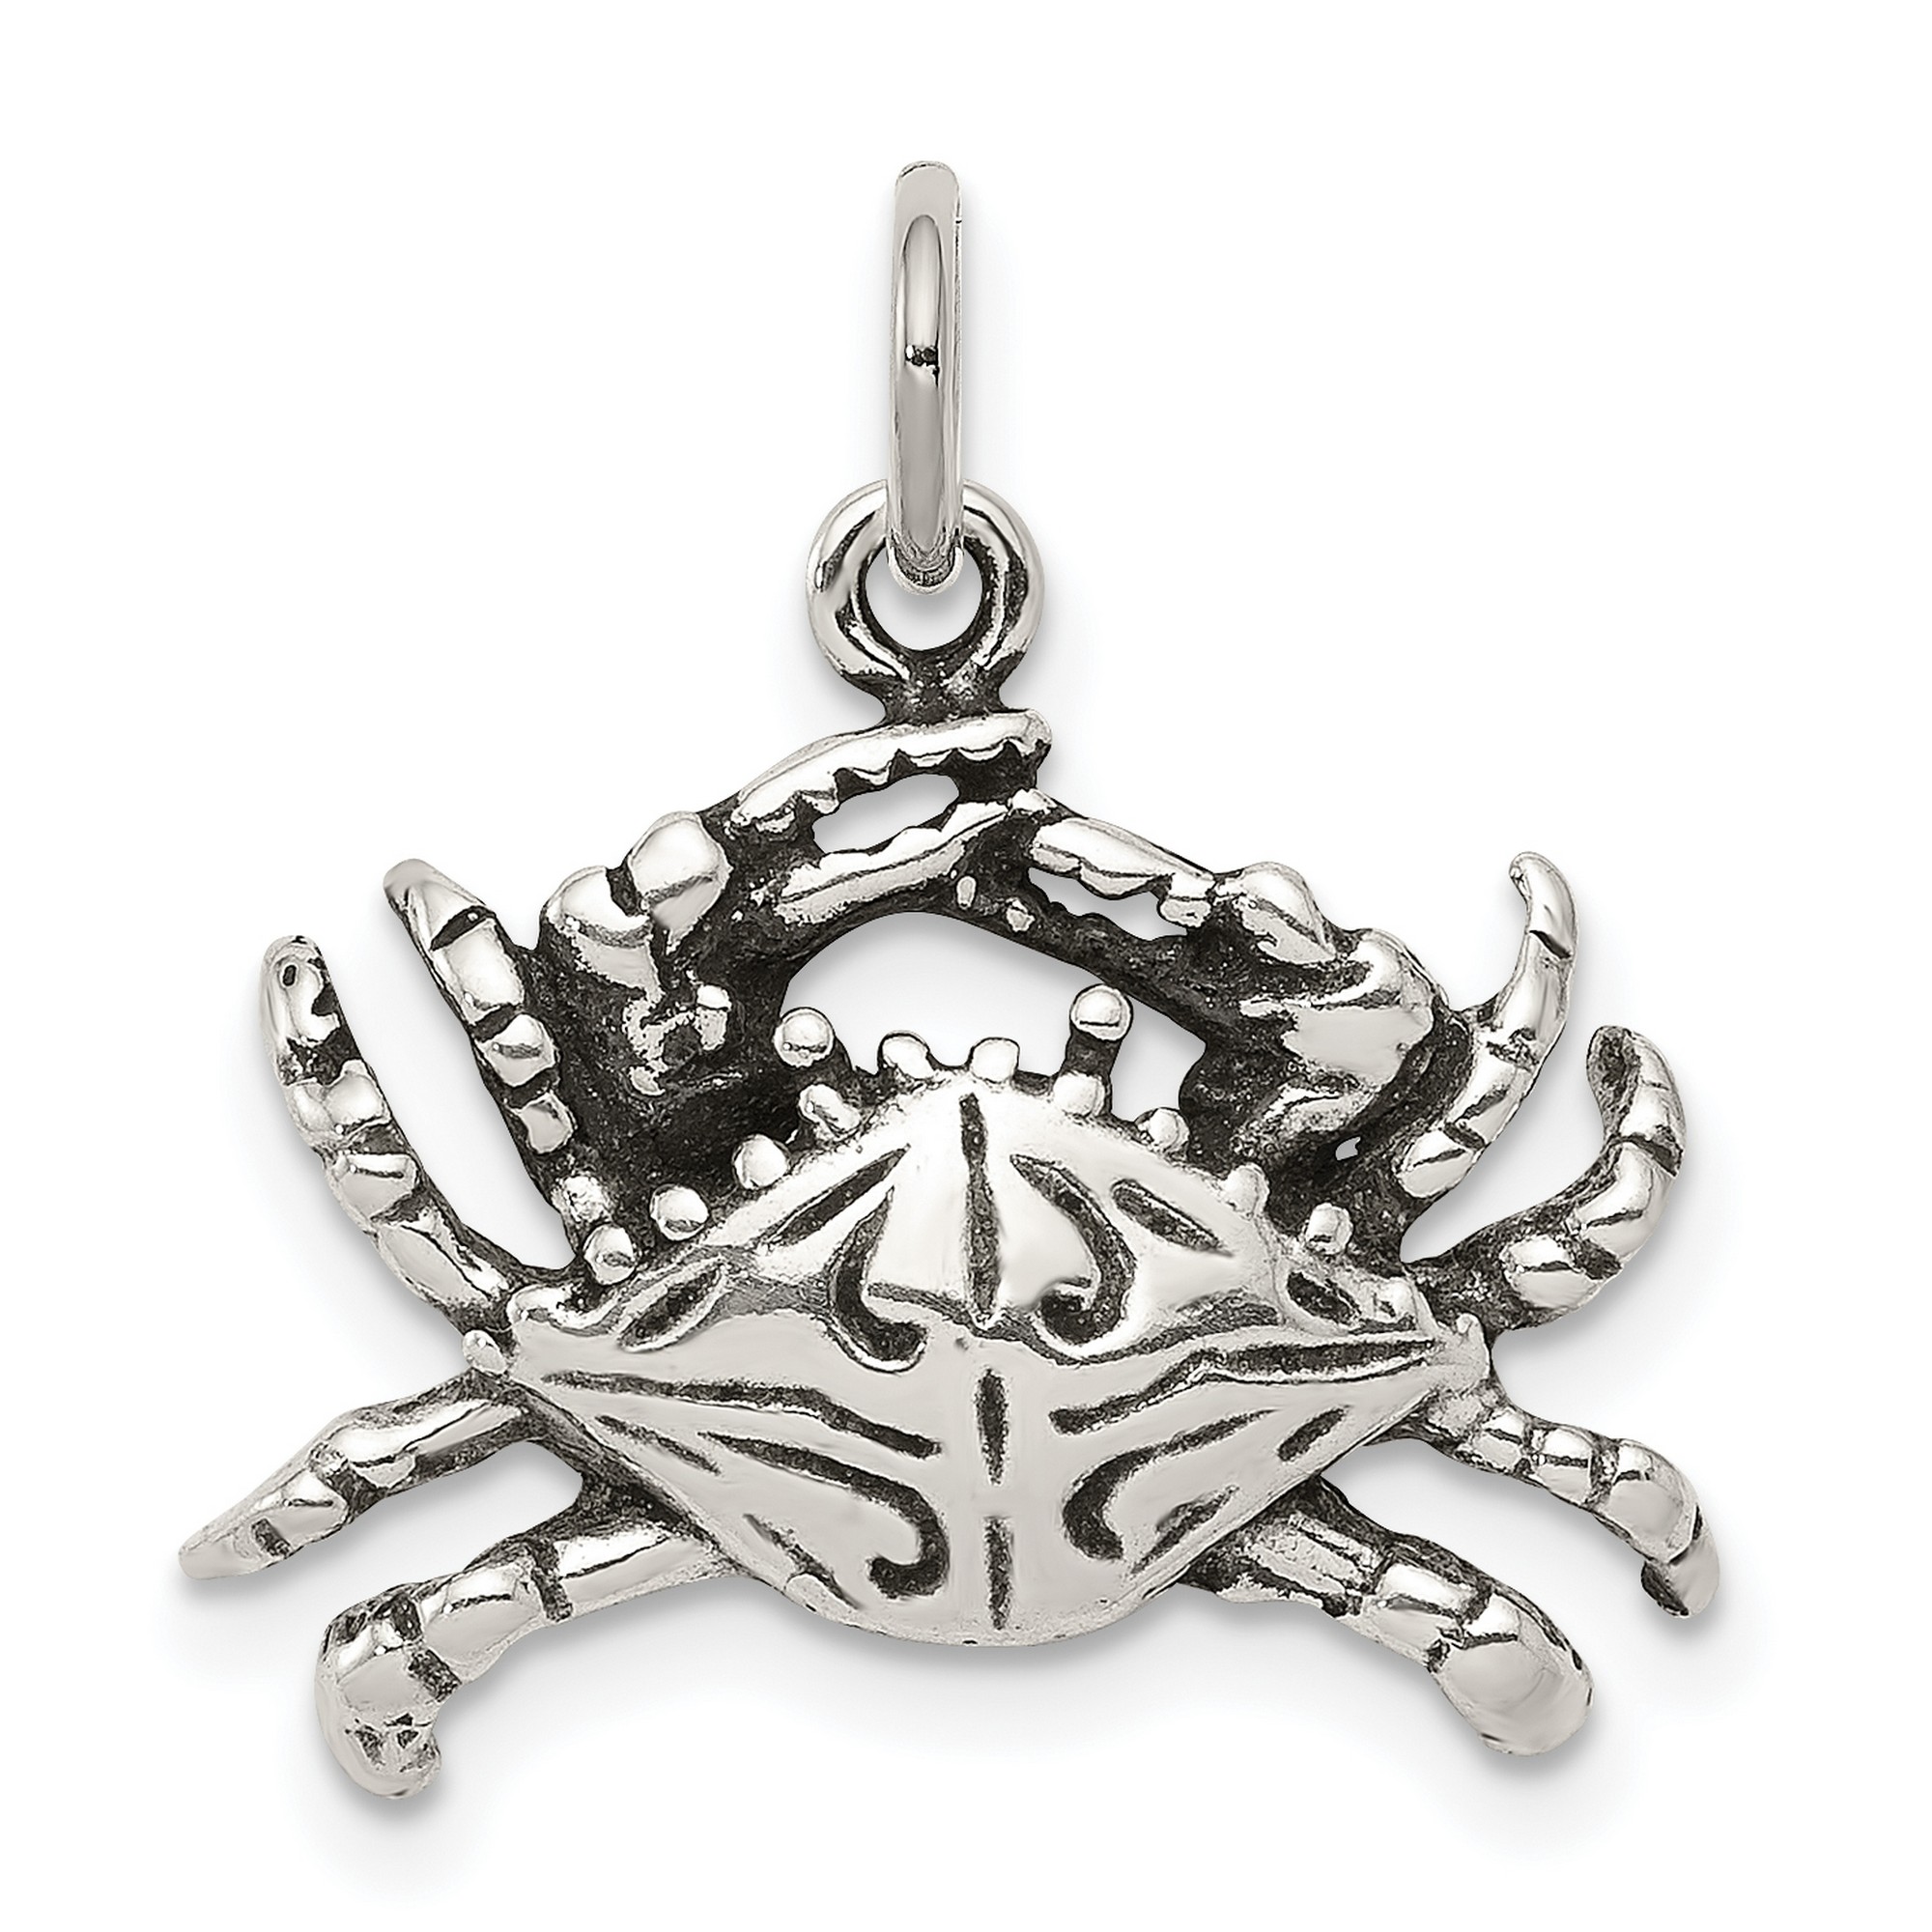 Crab Charm Pendant in Antiqued 925 Sterling Silver 17 mm x 21 mm 1.85gr ...